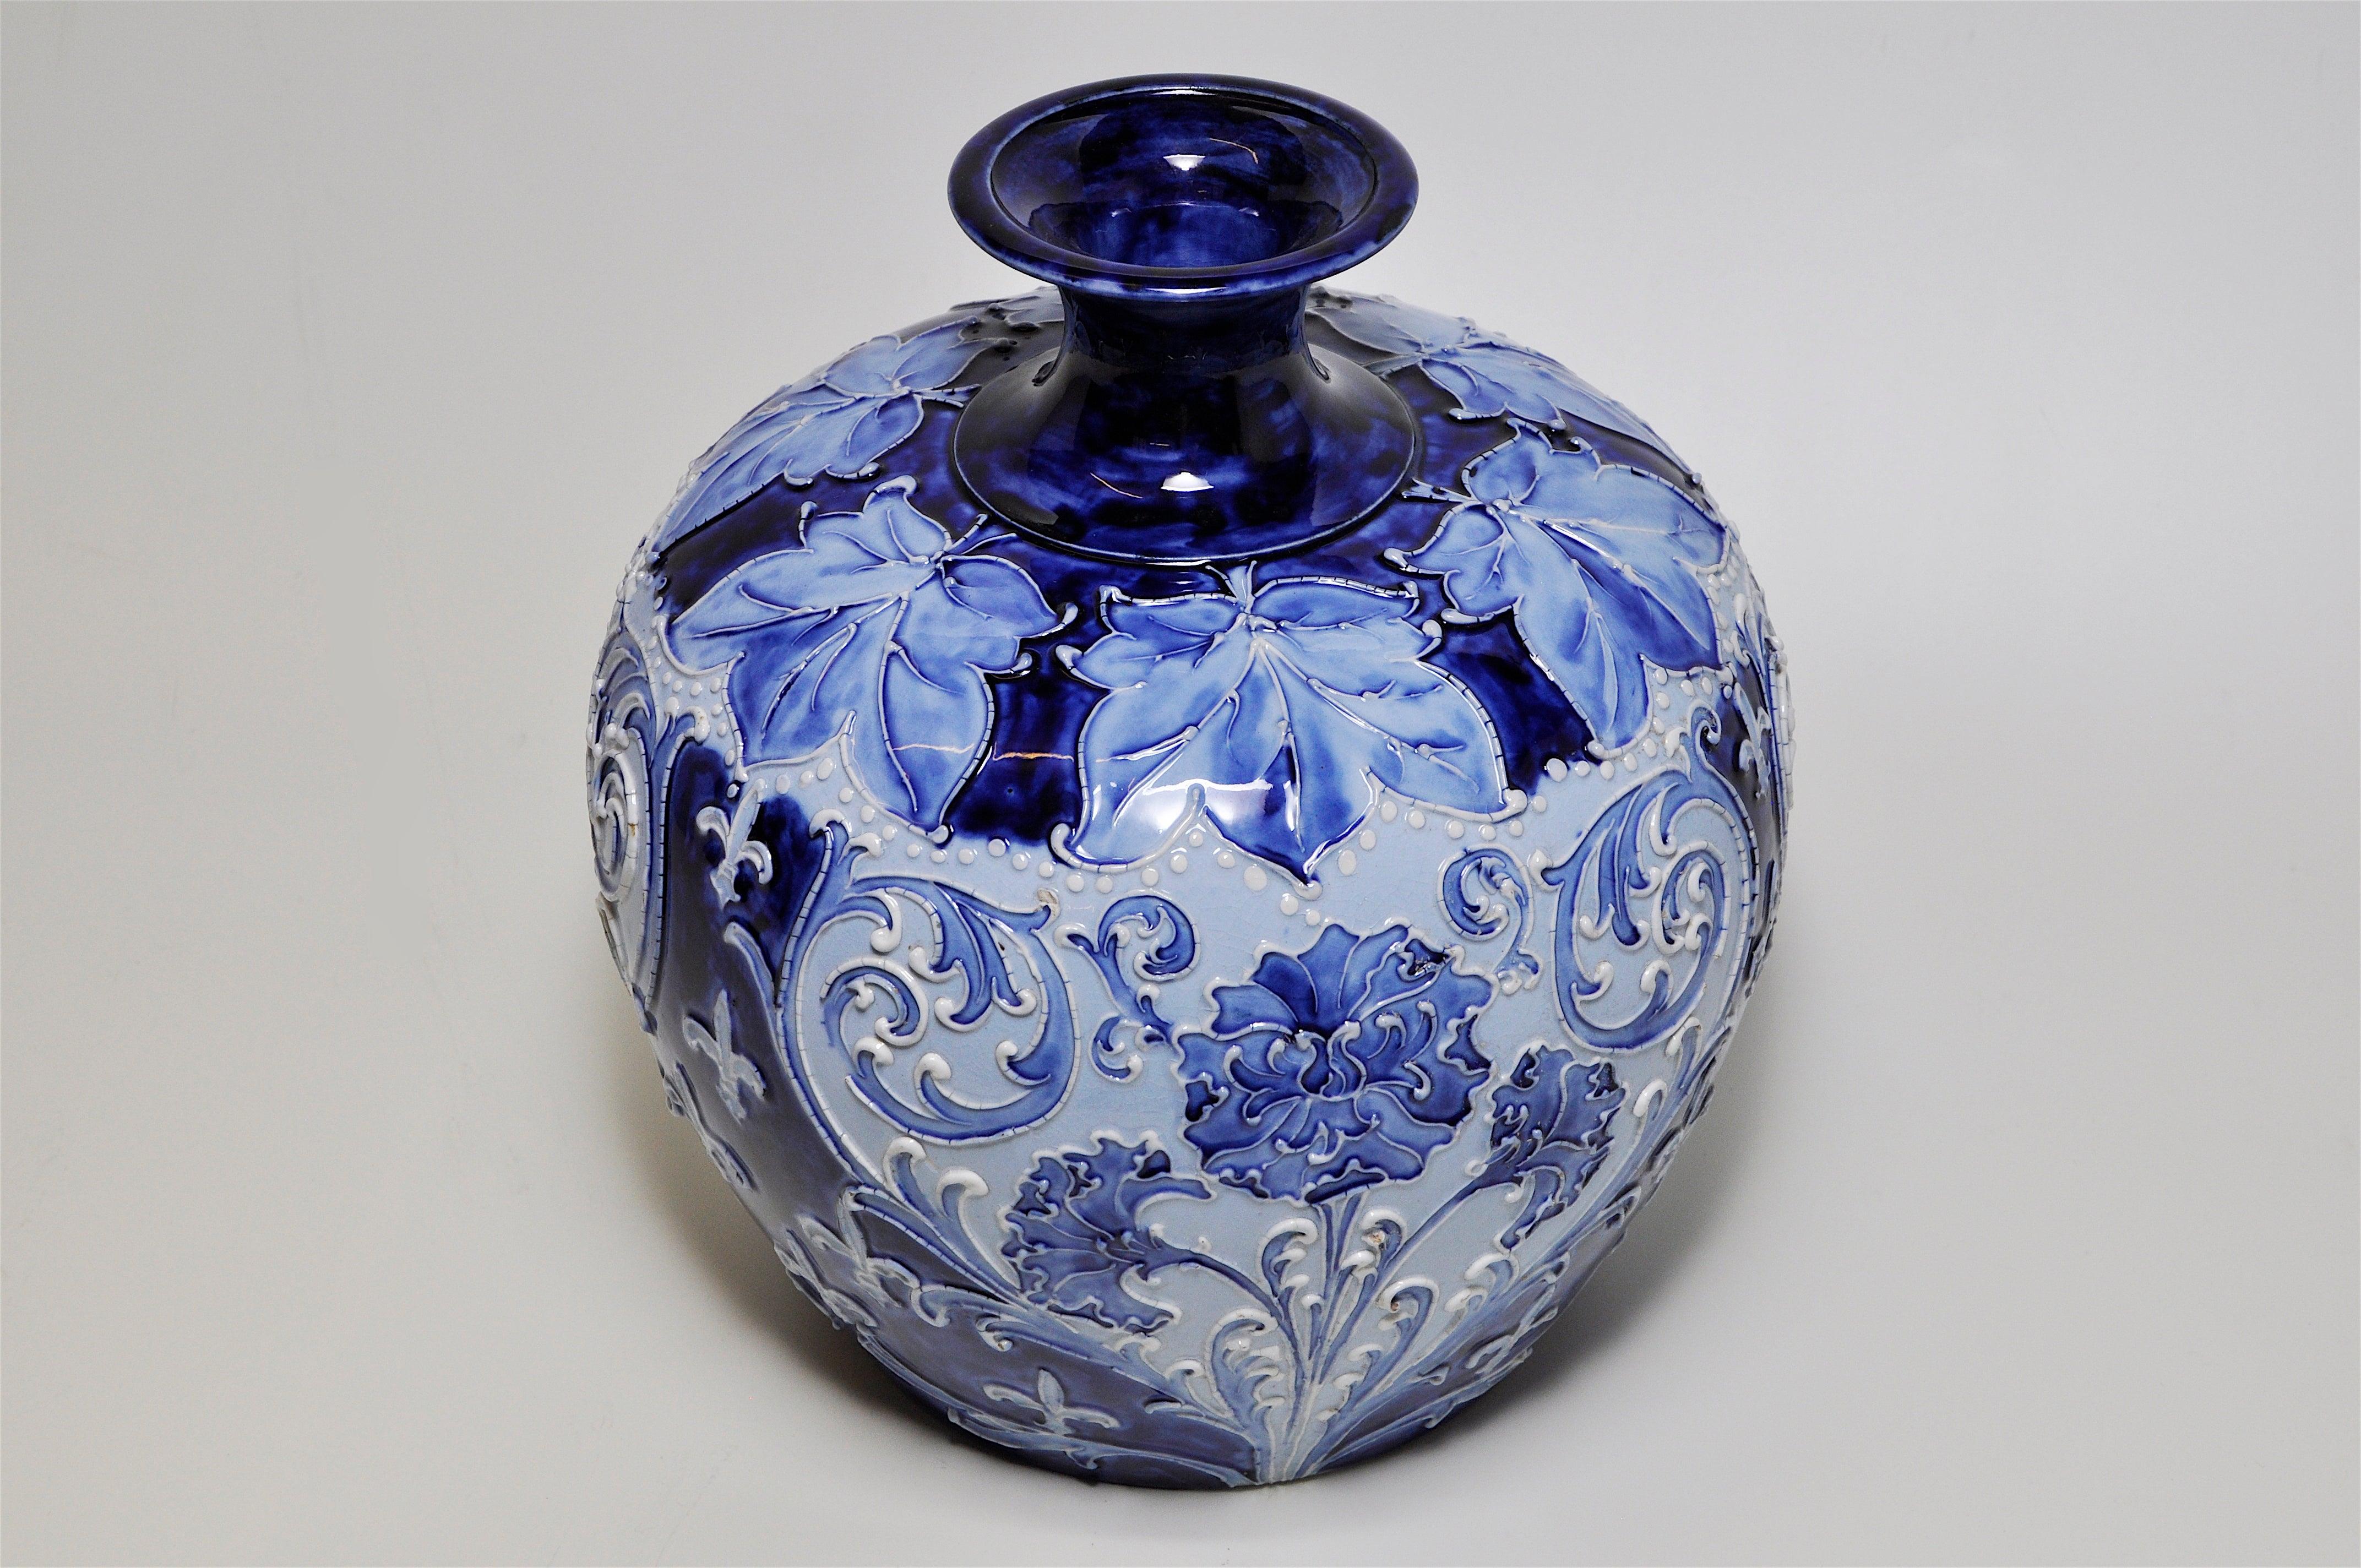 A fabulous large William Moorcroft Florian ware ceramic vase in striking blue and white with a highly decorated surface of finely tube-lined trailed slip technique. The organic floral forms of stylized dianthus sprays and maple leaves flow over the